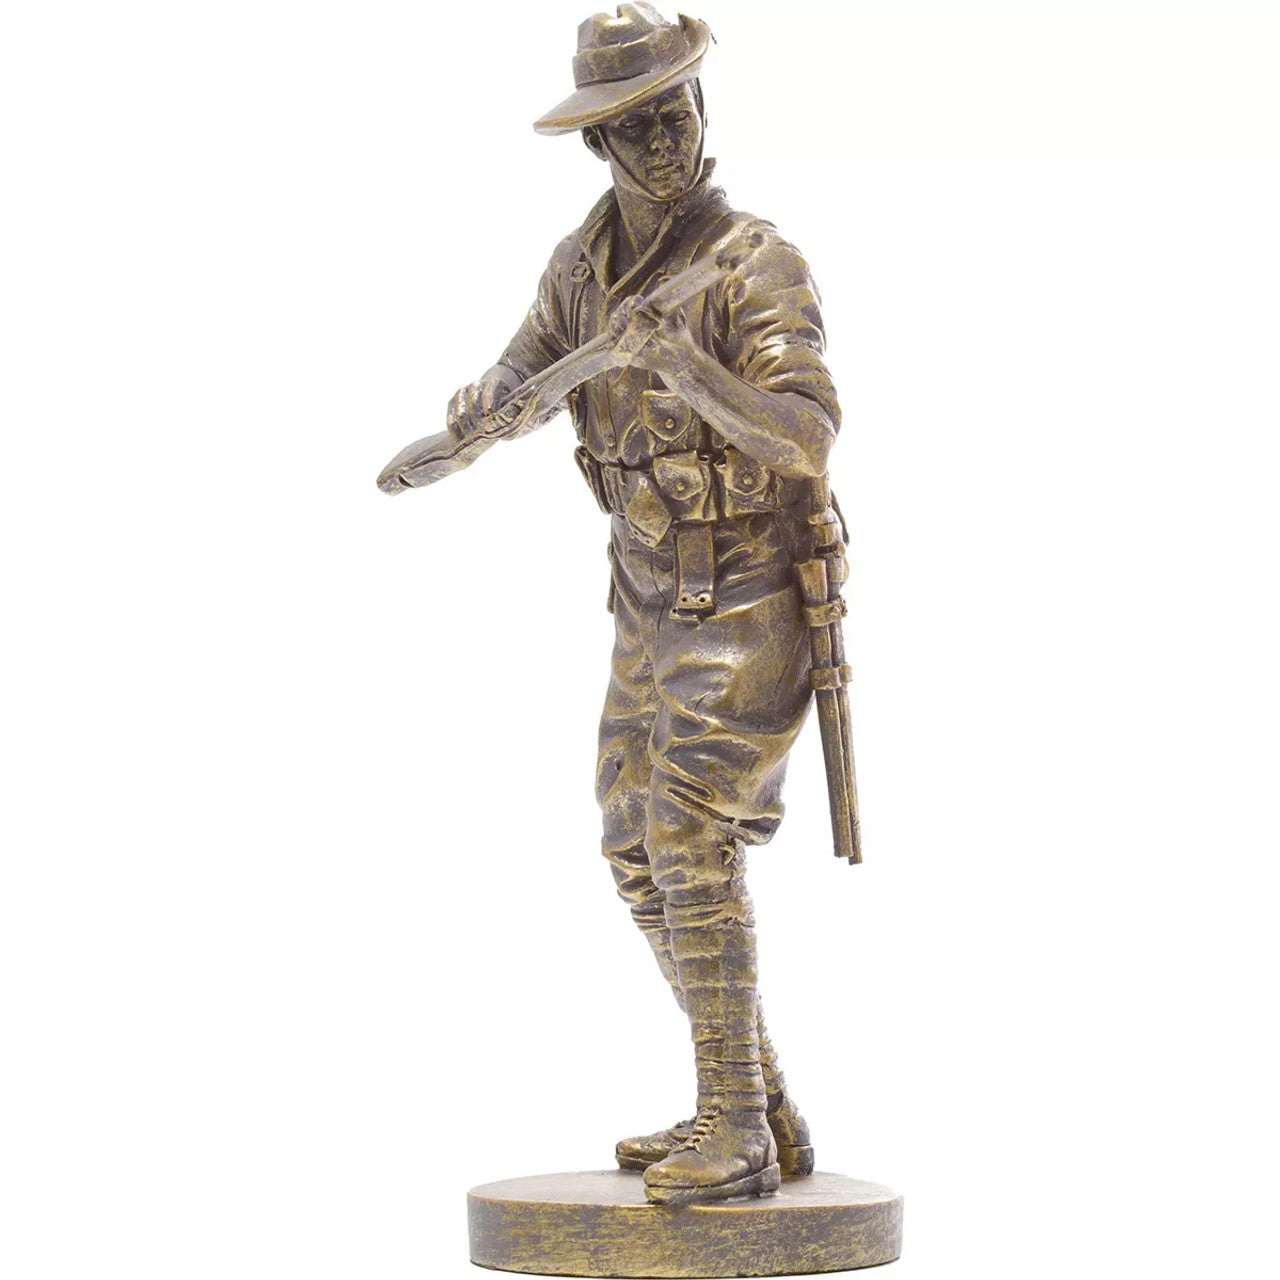 The sensational collector's edition of our fantastic WW1 Digger Miniature figurine. Only 100 of the WW1 Digger Miniature figurines feature this unique gold finish, creating the Collector's Gold Edition. www.defenceqstore.com.au